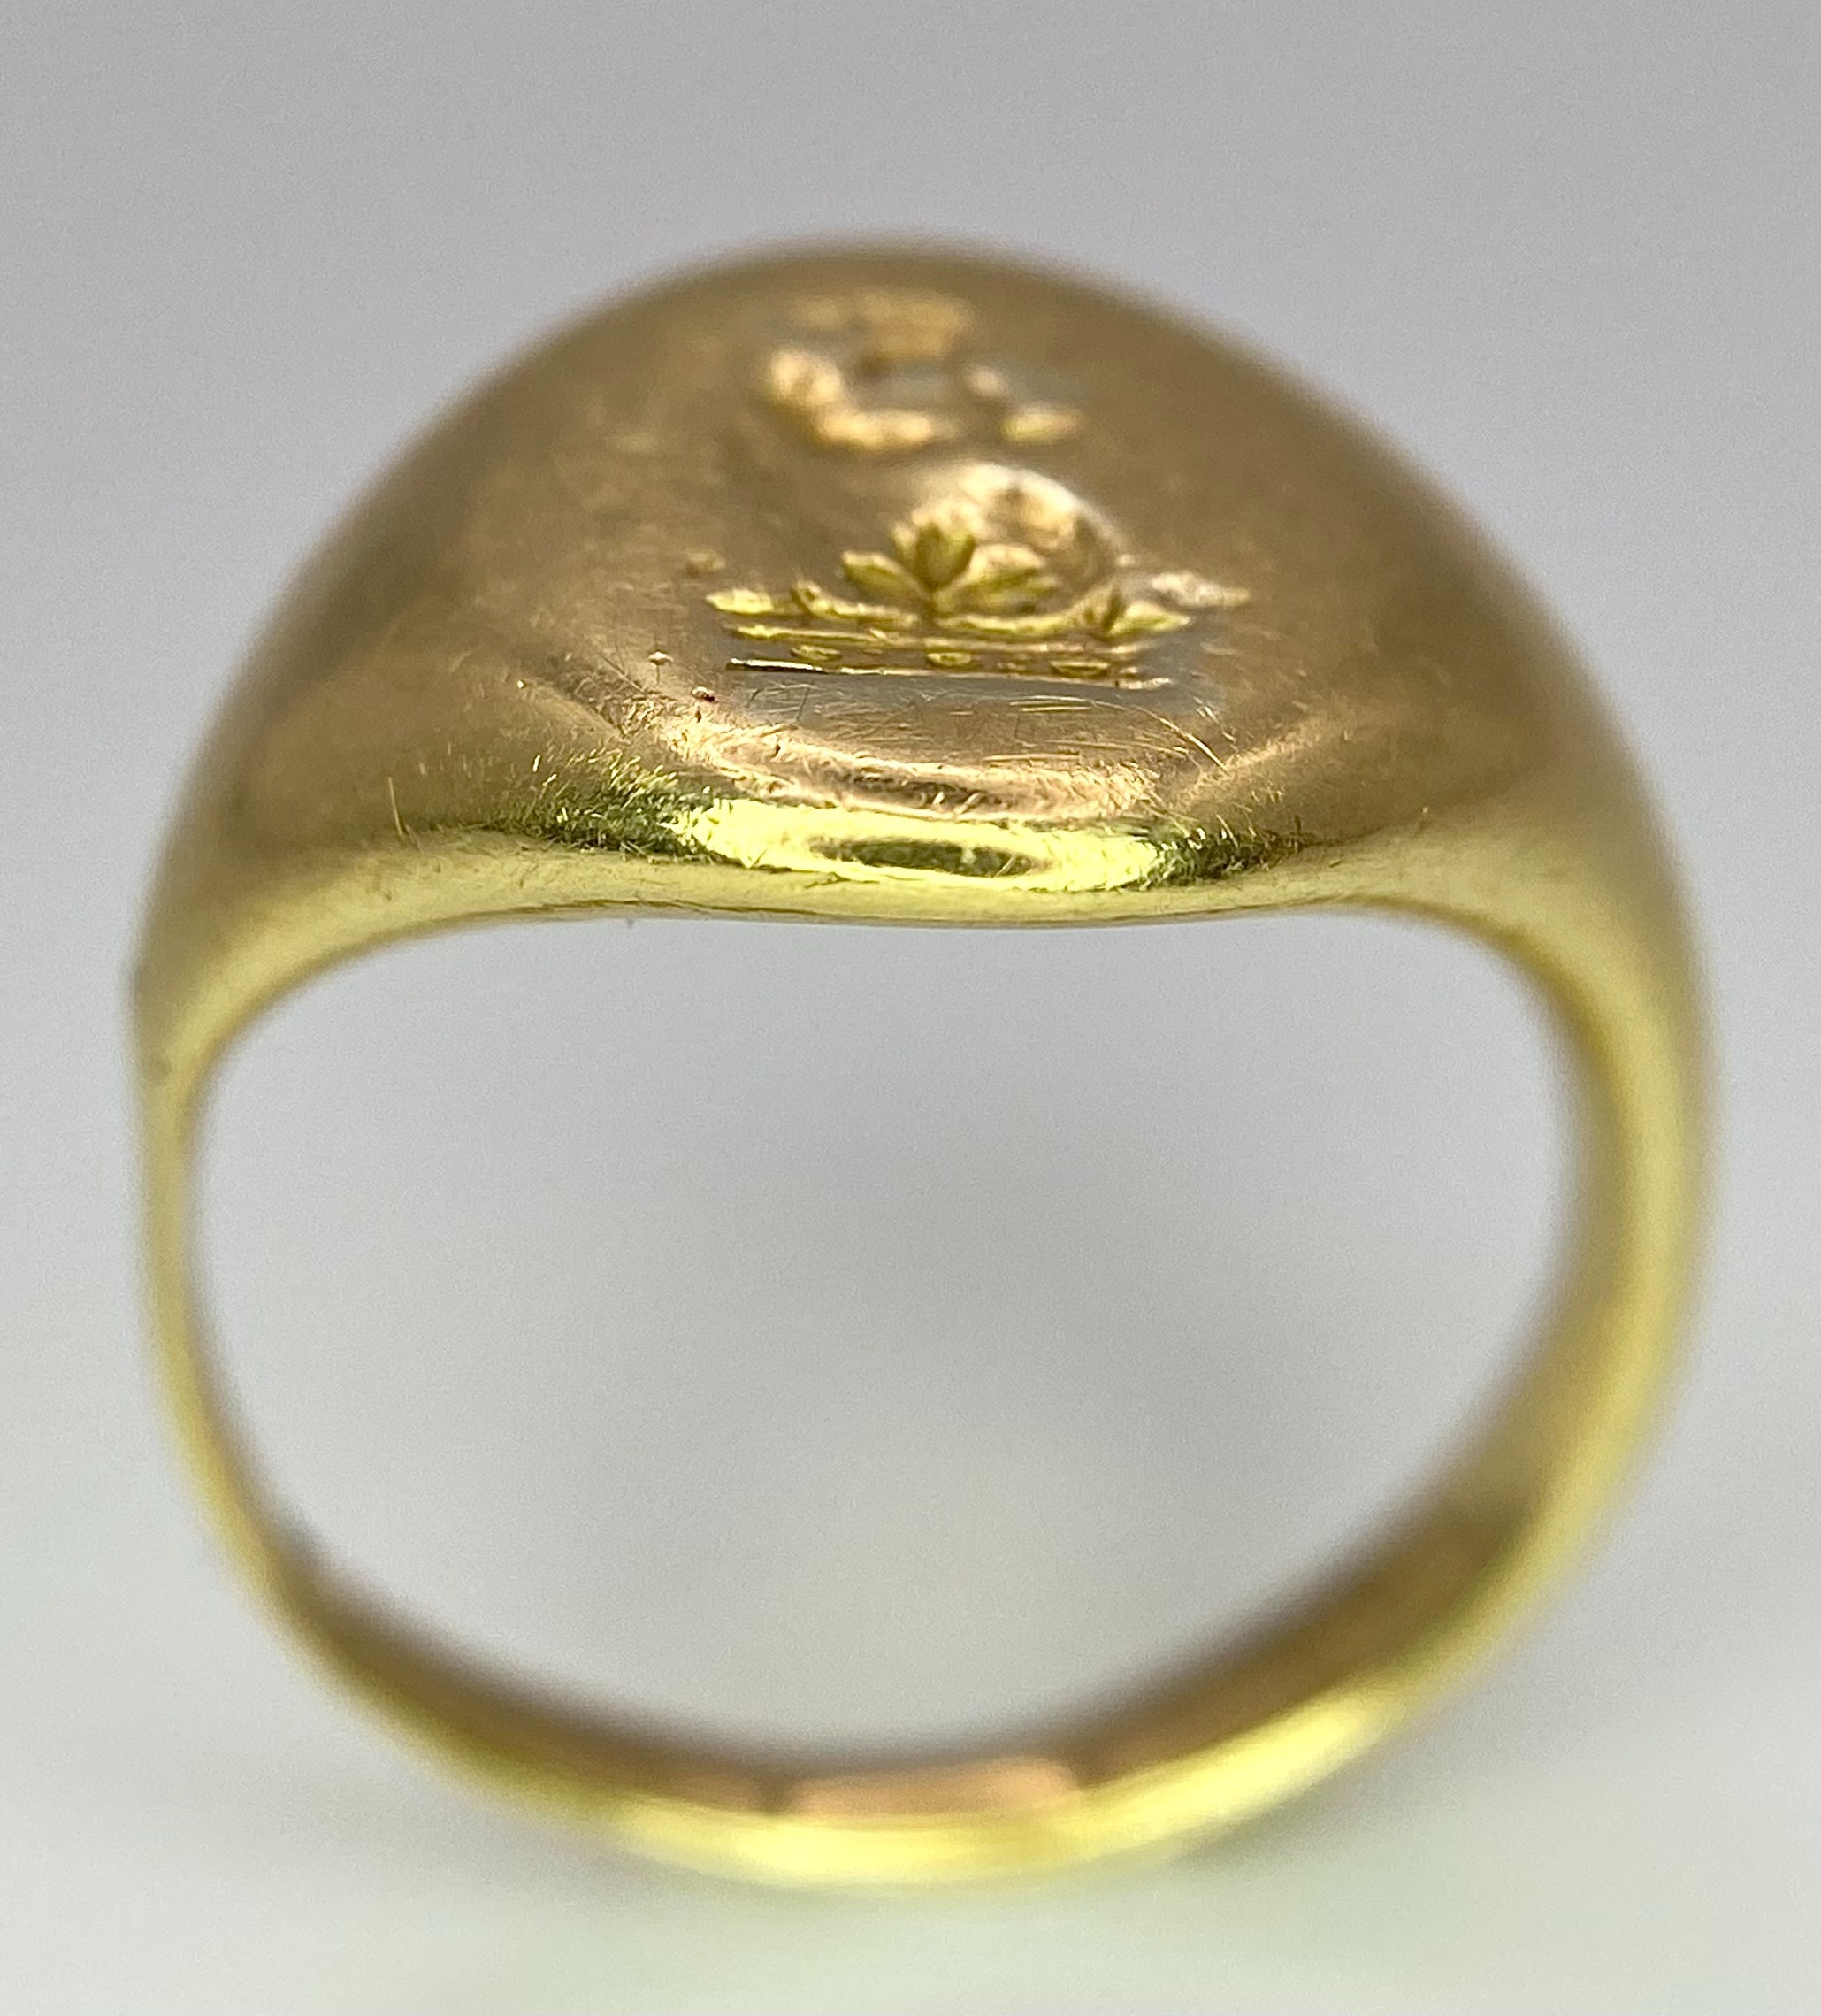 AN 18K YELLOW GOLD VINTAGE SEAL ENGRAVED SIGNET RING. Size K, 7.8g total weight. Ref: SC 8060 - Image 8 of 9